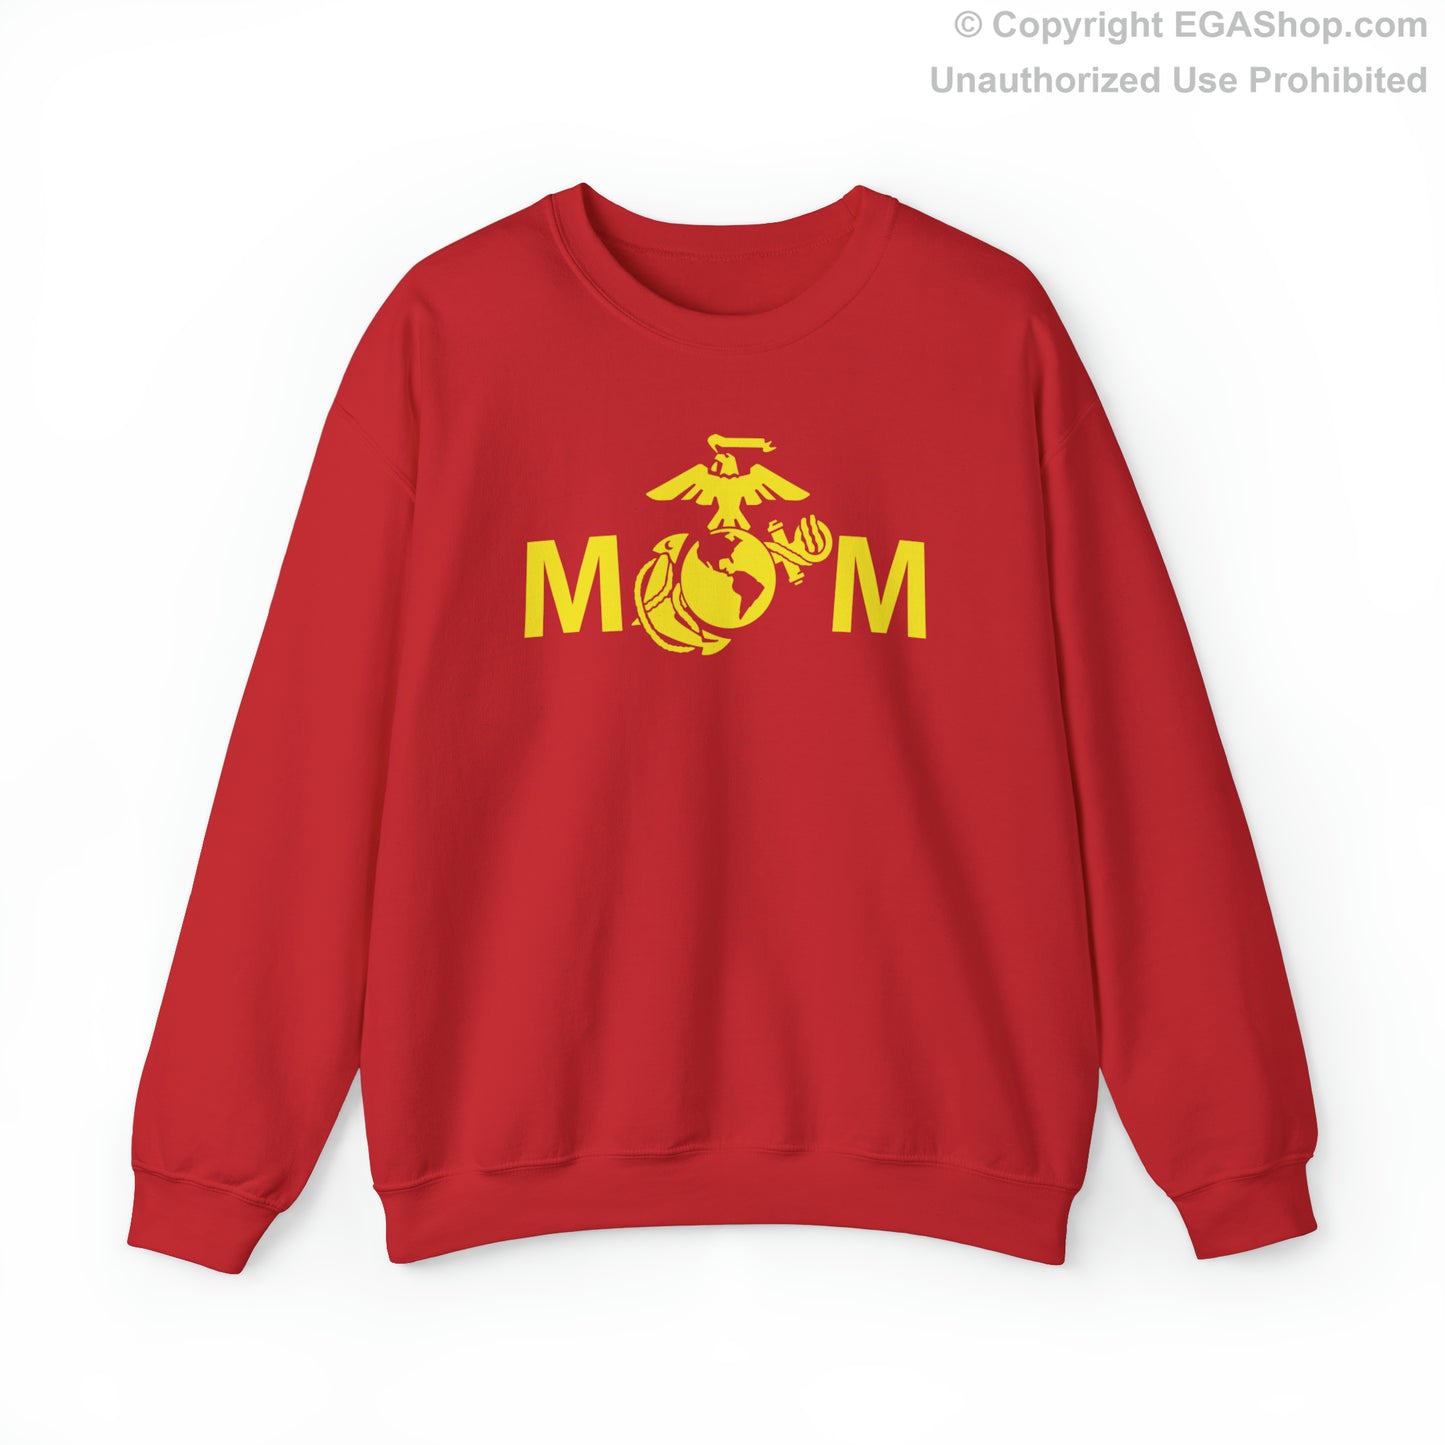 Sweatshirt: MoM with the EGA (your choice of colors)